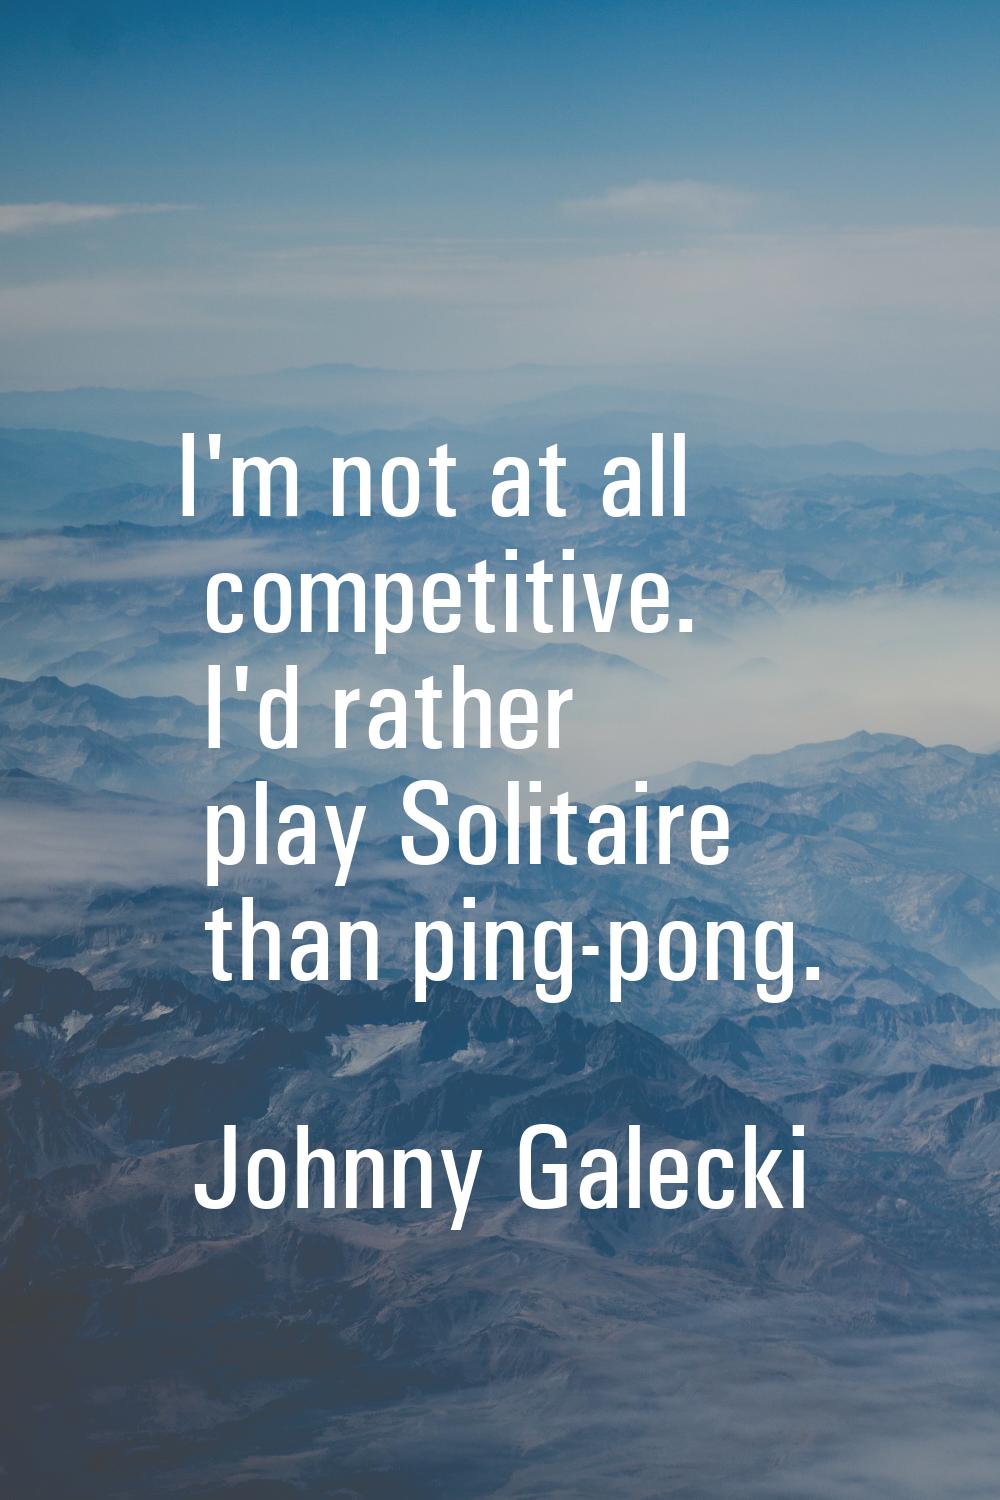 I'm not at all competitive. I'd rather play Solitaire than ping-pong.